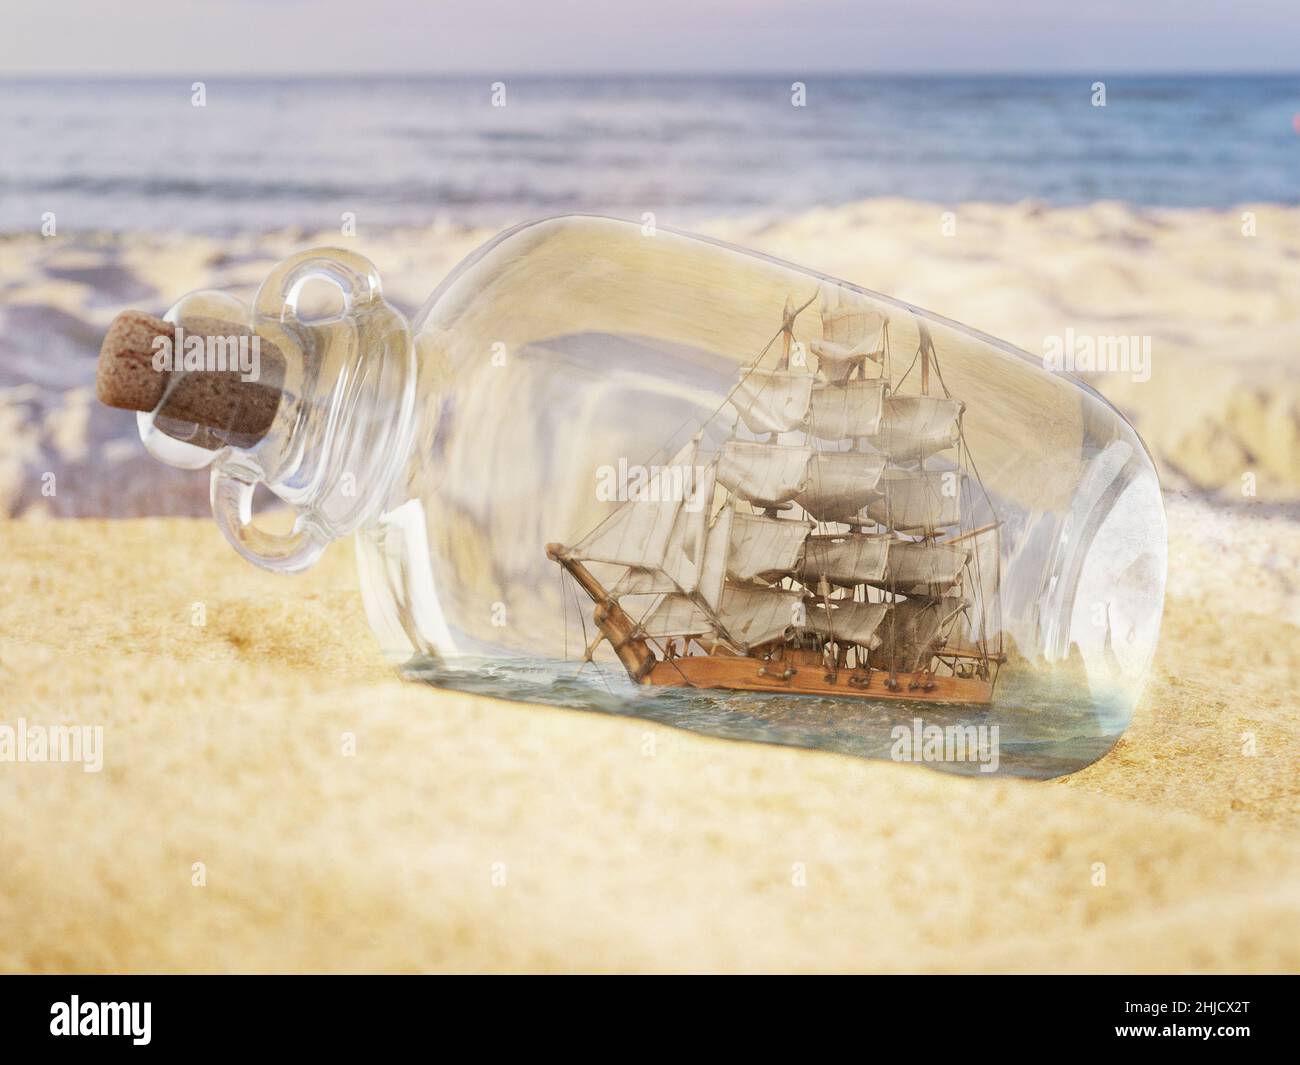 3d rendering of ship trapped in corked glass bottle washed ashore Stock Photo